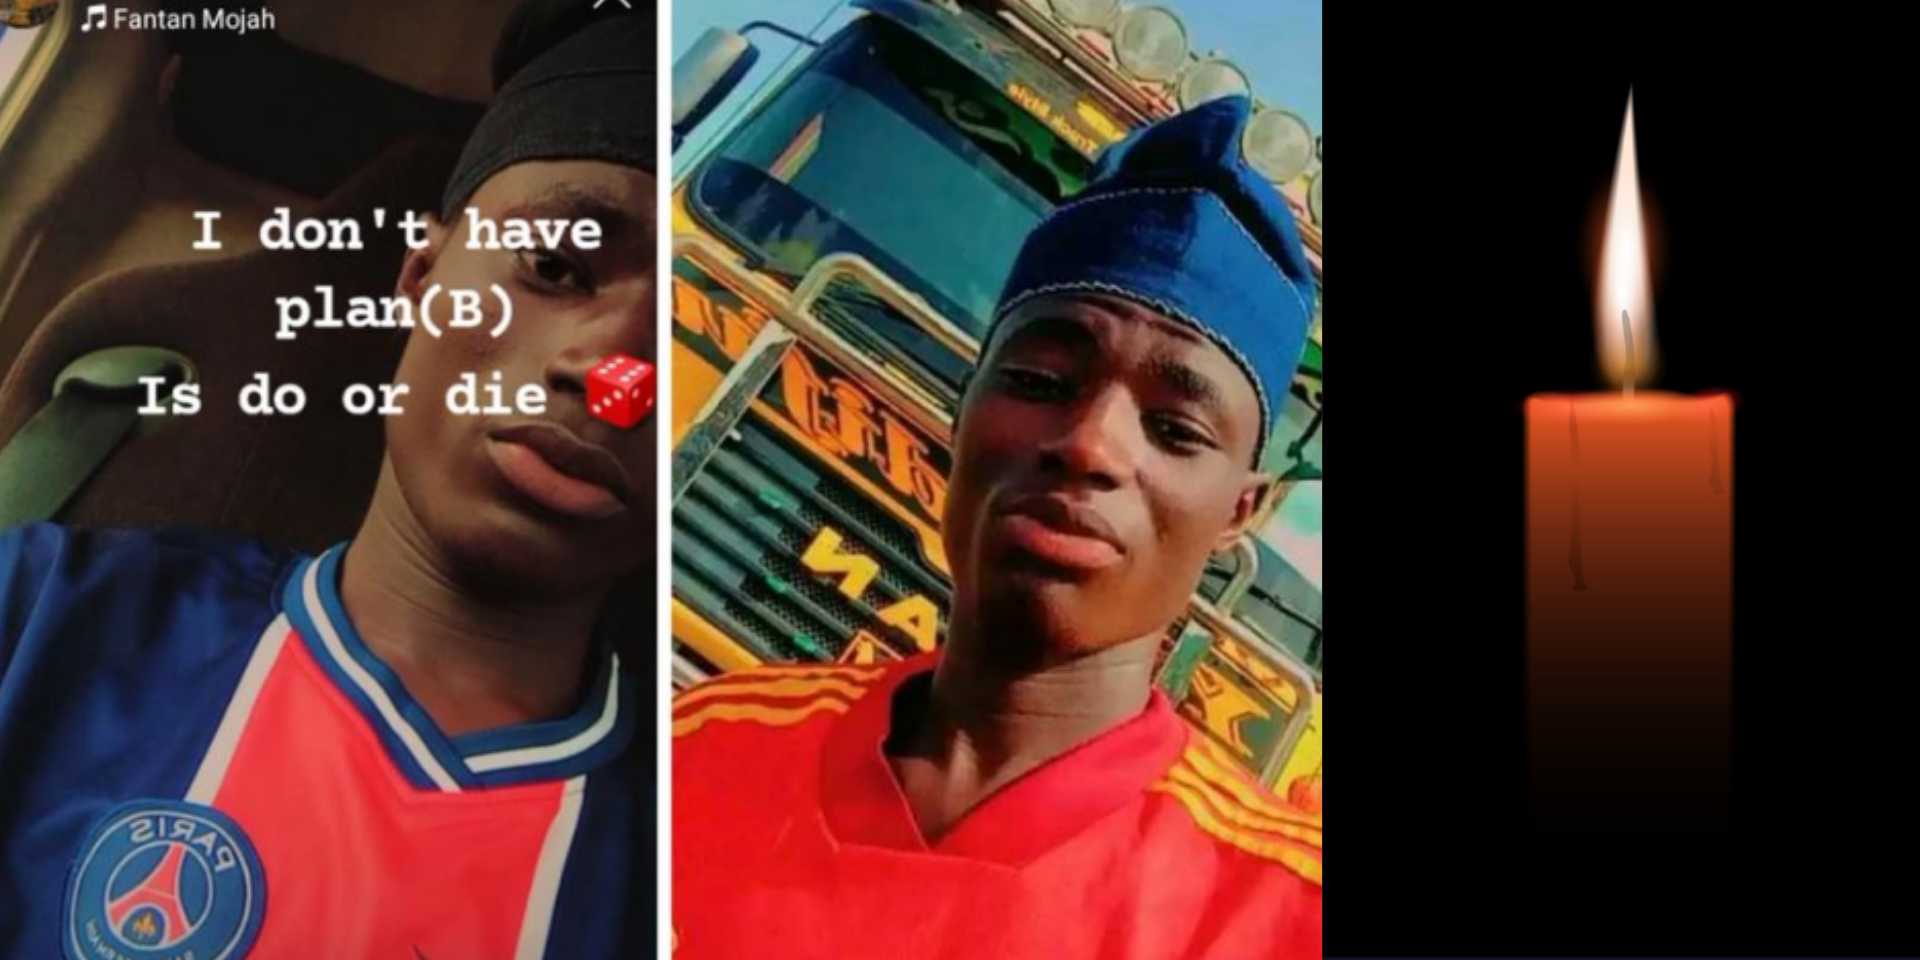 Hours after making a Facebook post about his death, young man dies in car crash